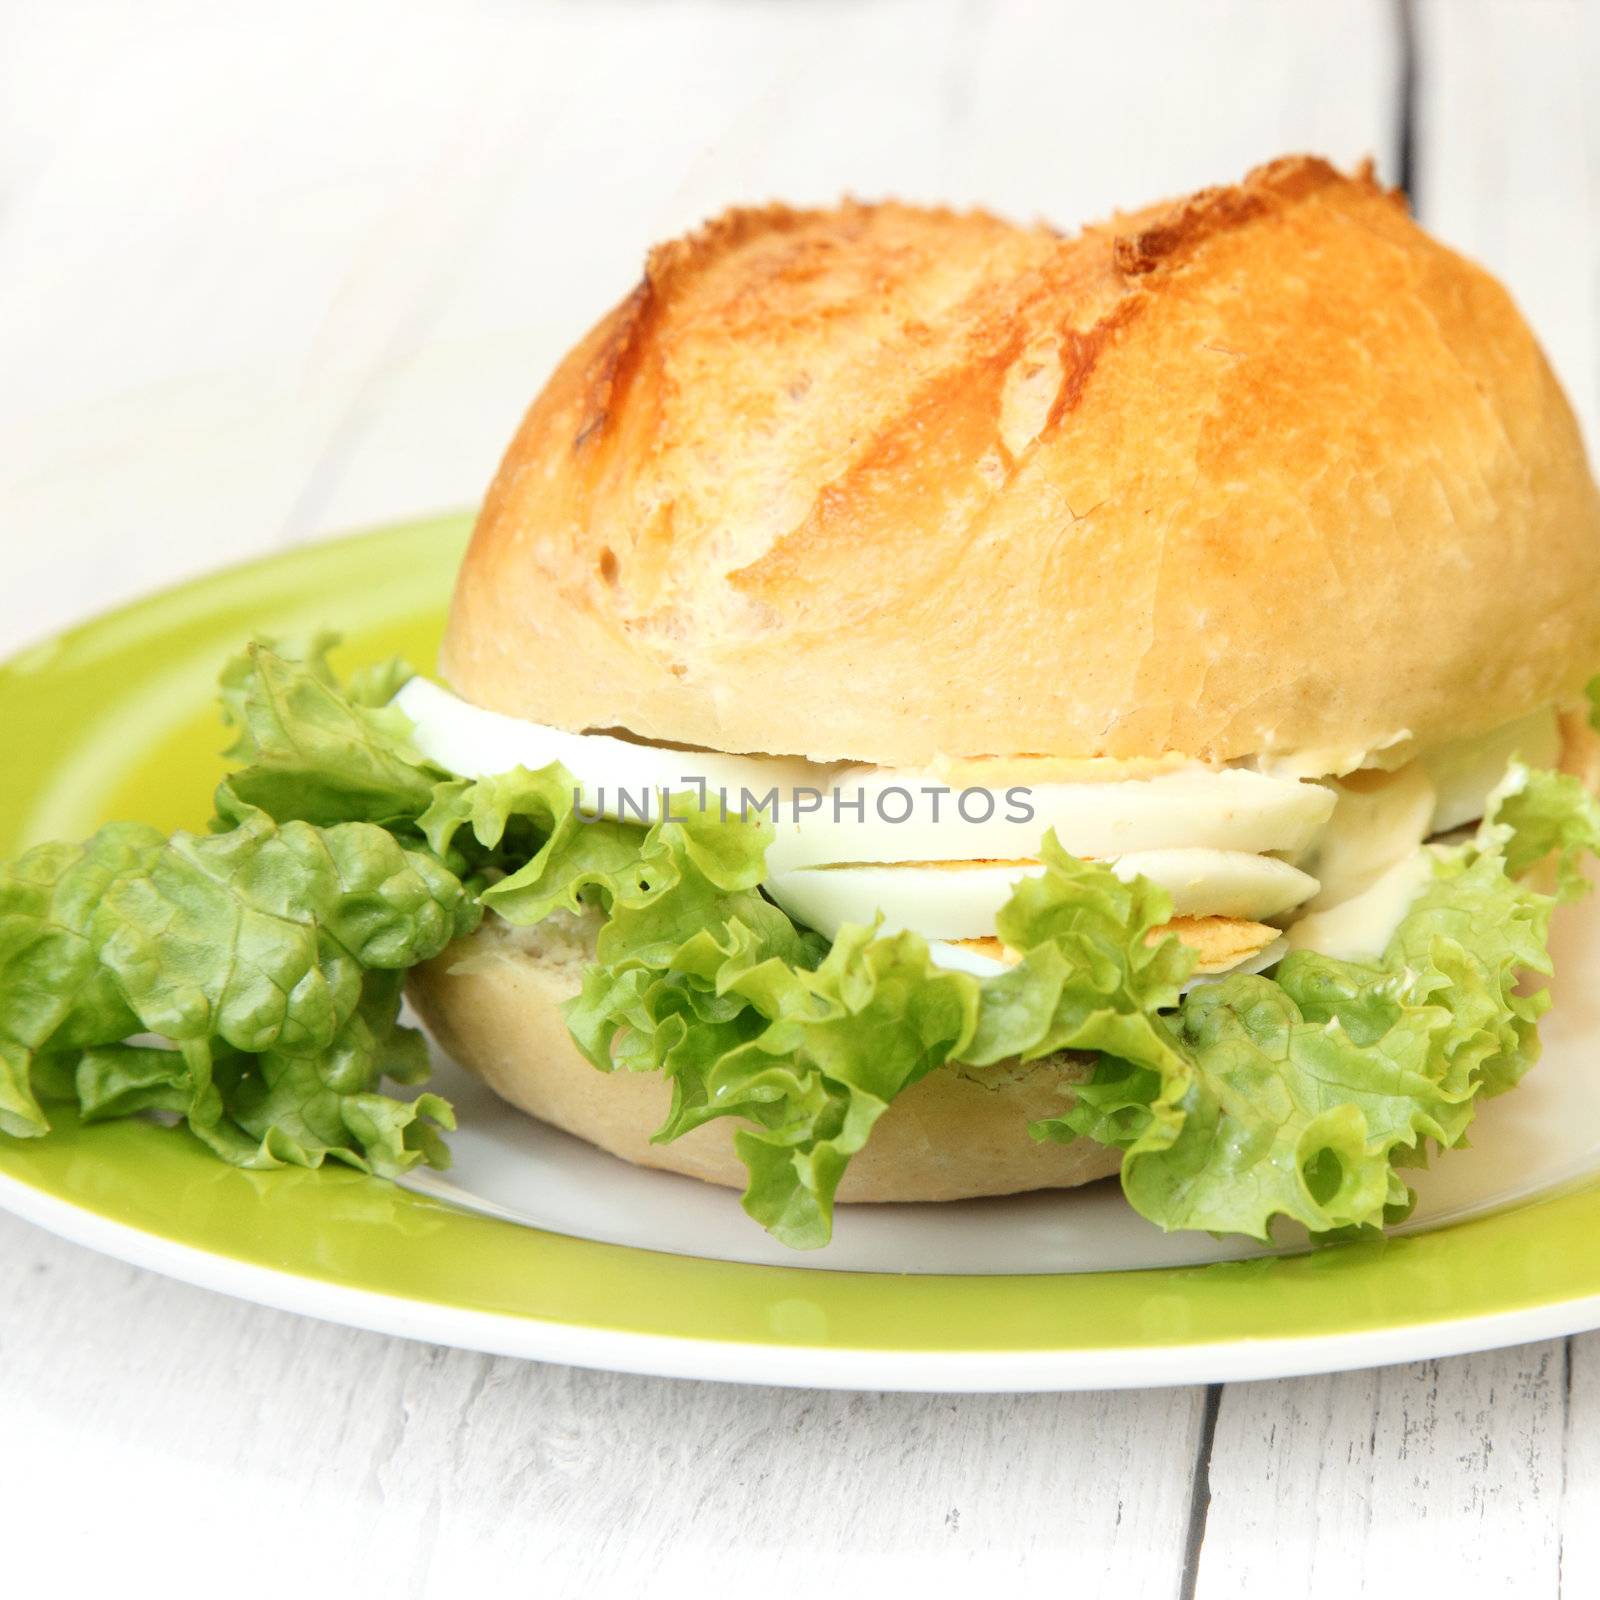 Crisp bun with egg and lettuce filling by Farina6000